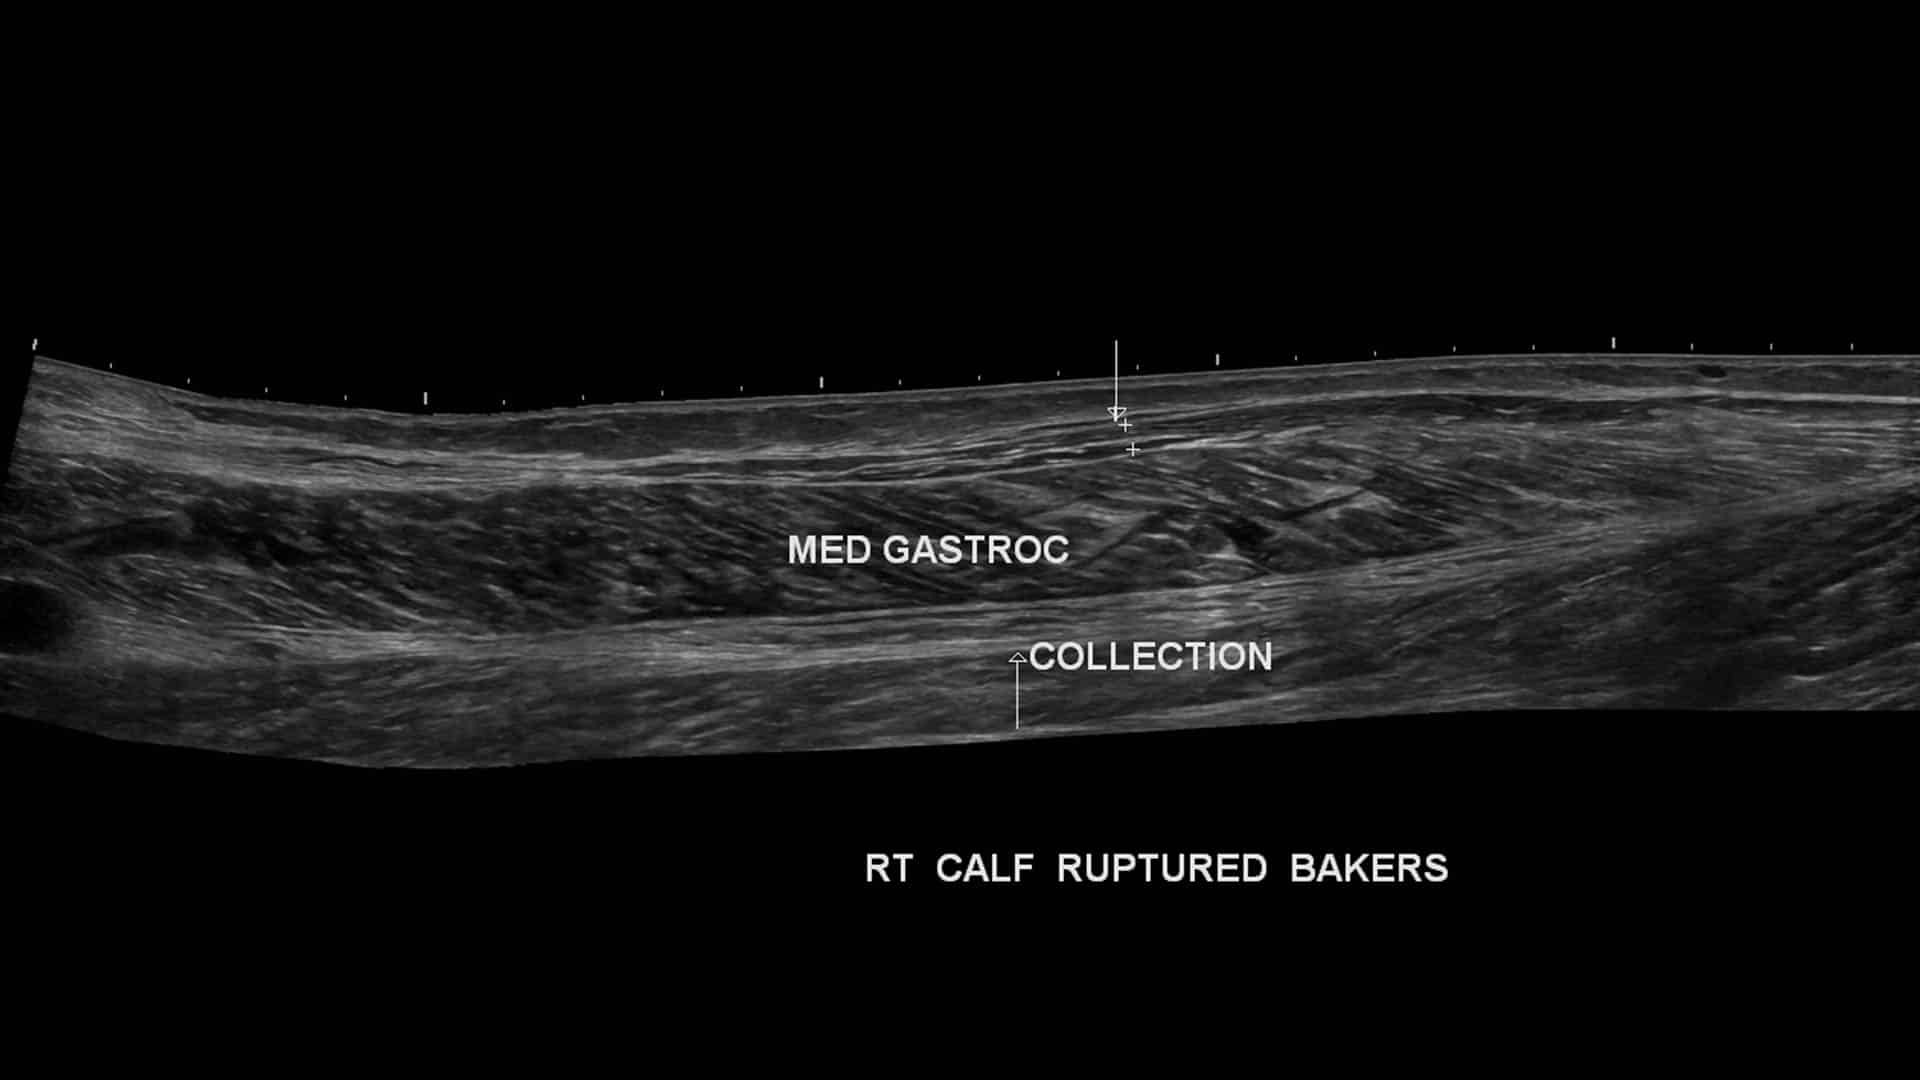 Ultrasound examination of the calf demonstrates fluid within the subcutaneous tissues due to a ruptured Baker’s cyst (arrow).